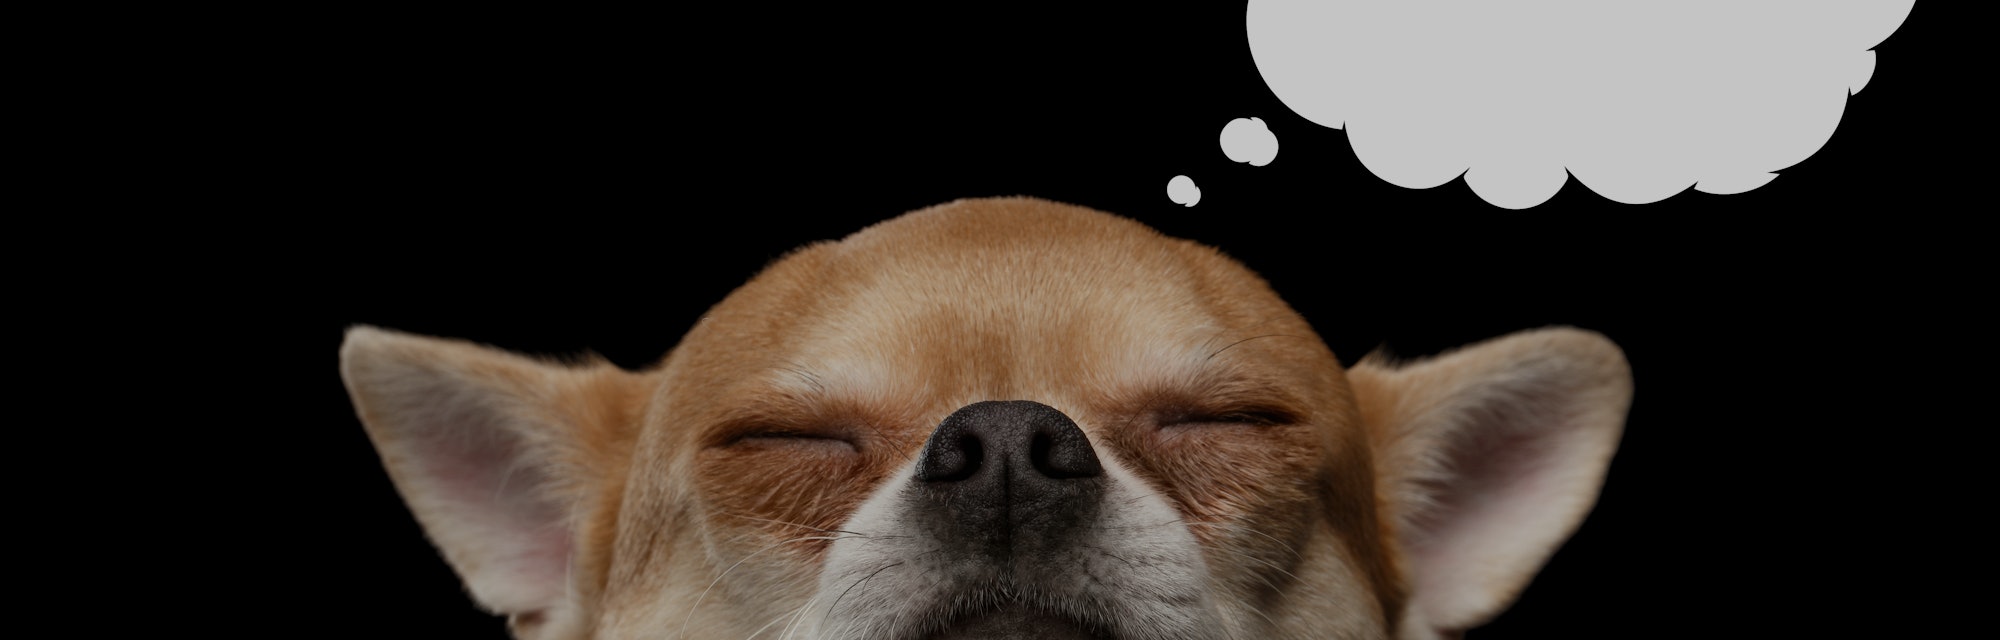 Chihuahua dog thinking with closed eyes, in bubble, isolated on Black background